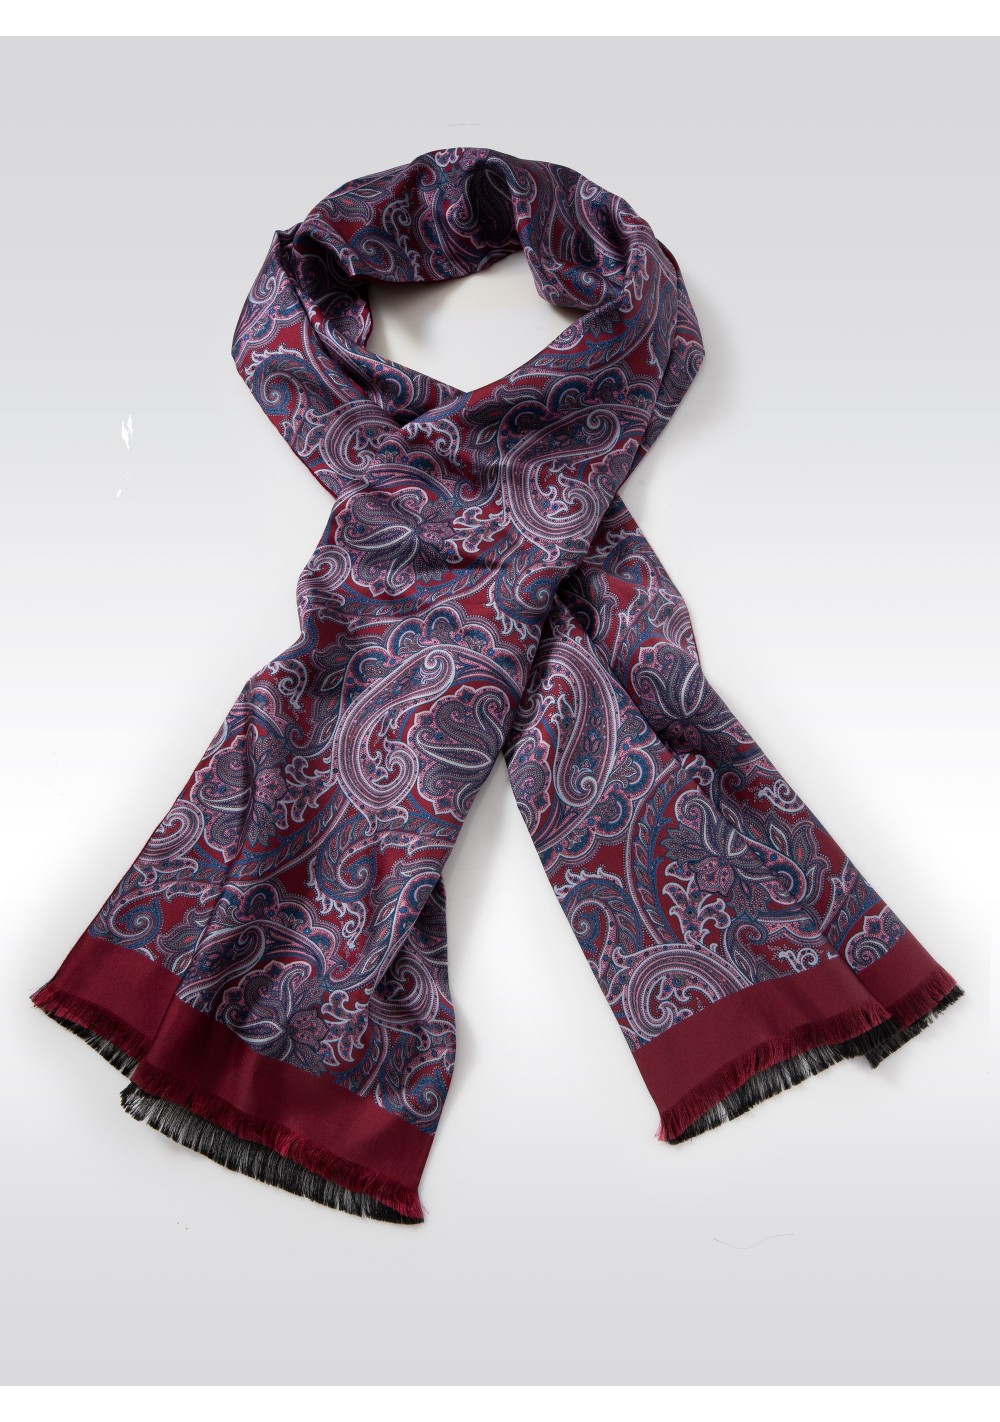 Buy CR Purple and Pink Paisley Silk Scarf at CR RanchWear for only